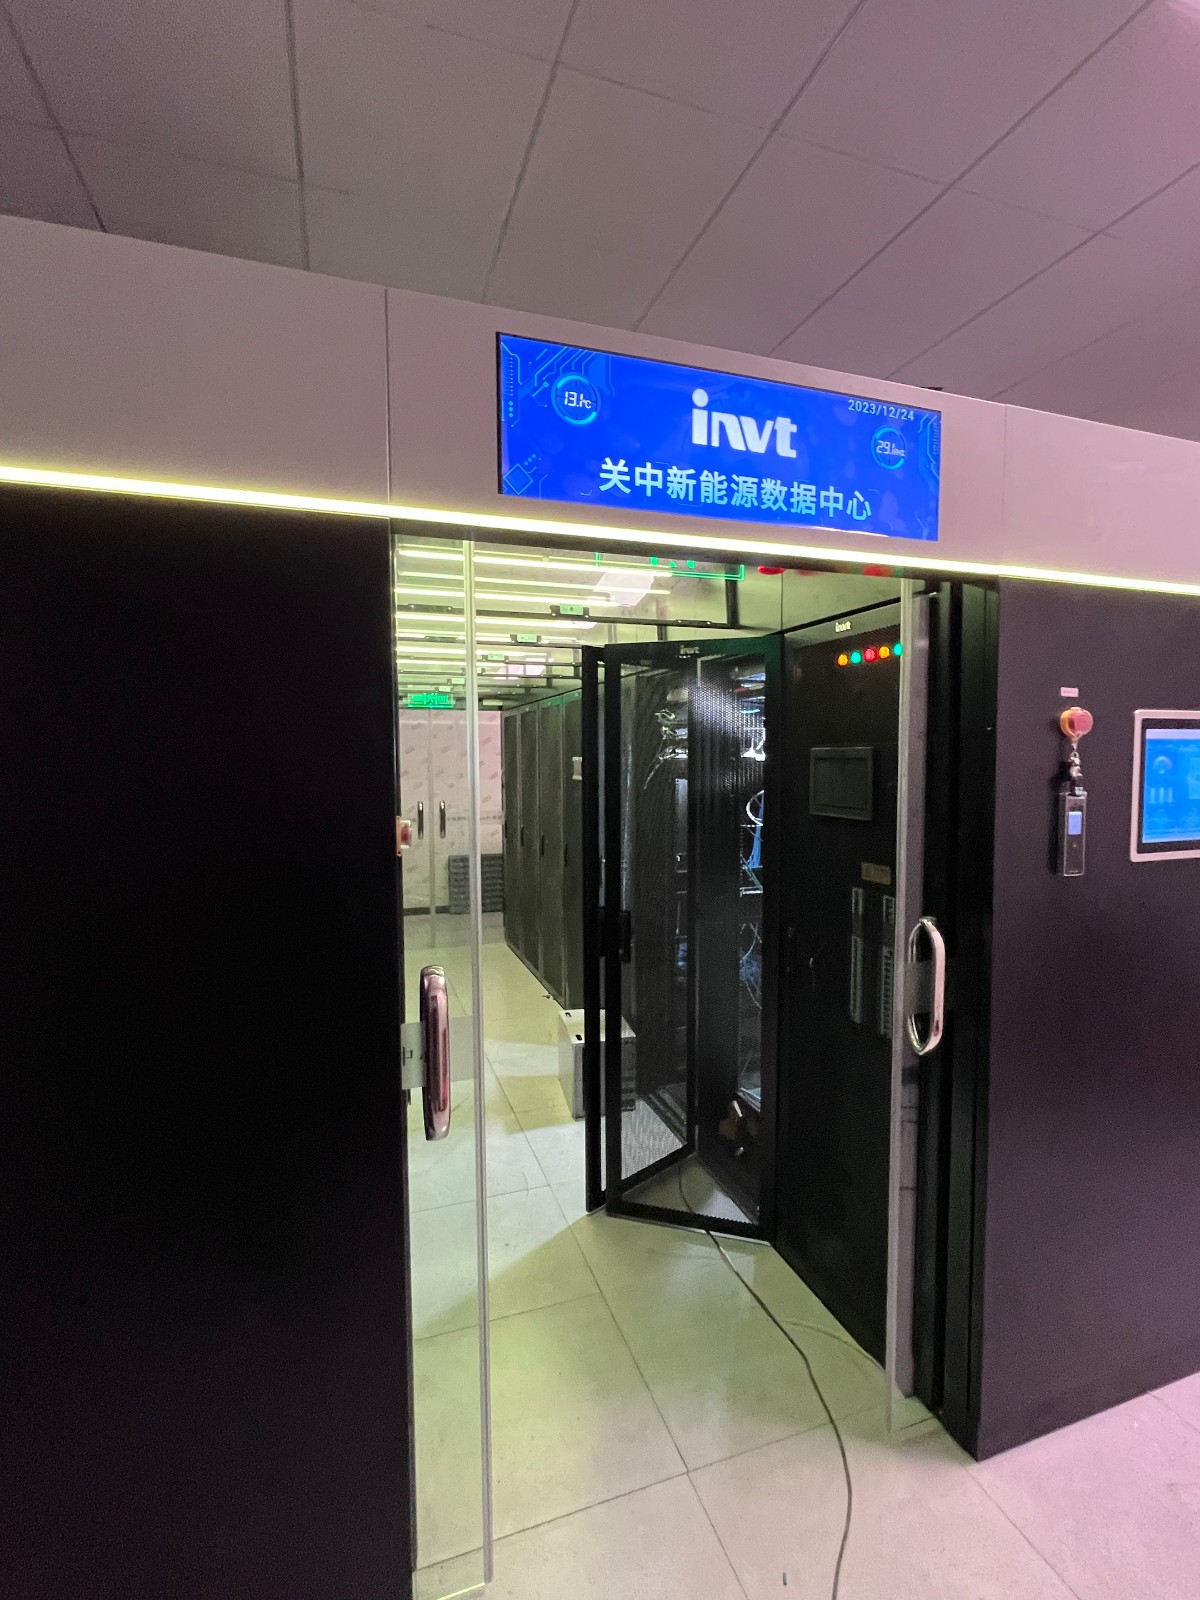 iTalent Modular Data Center used in Guanzhong New Energy Project-INVT Network Power